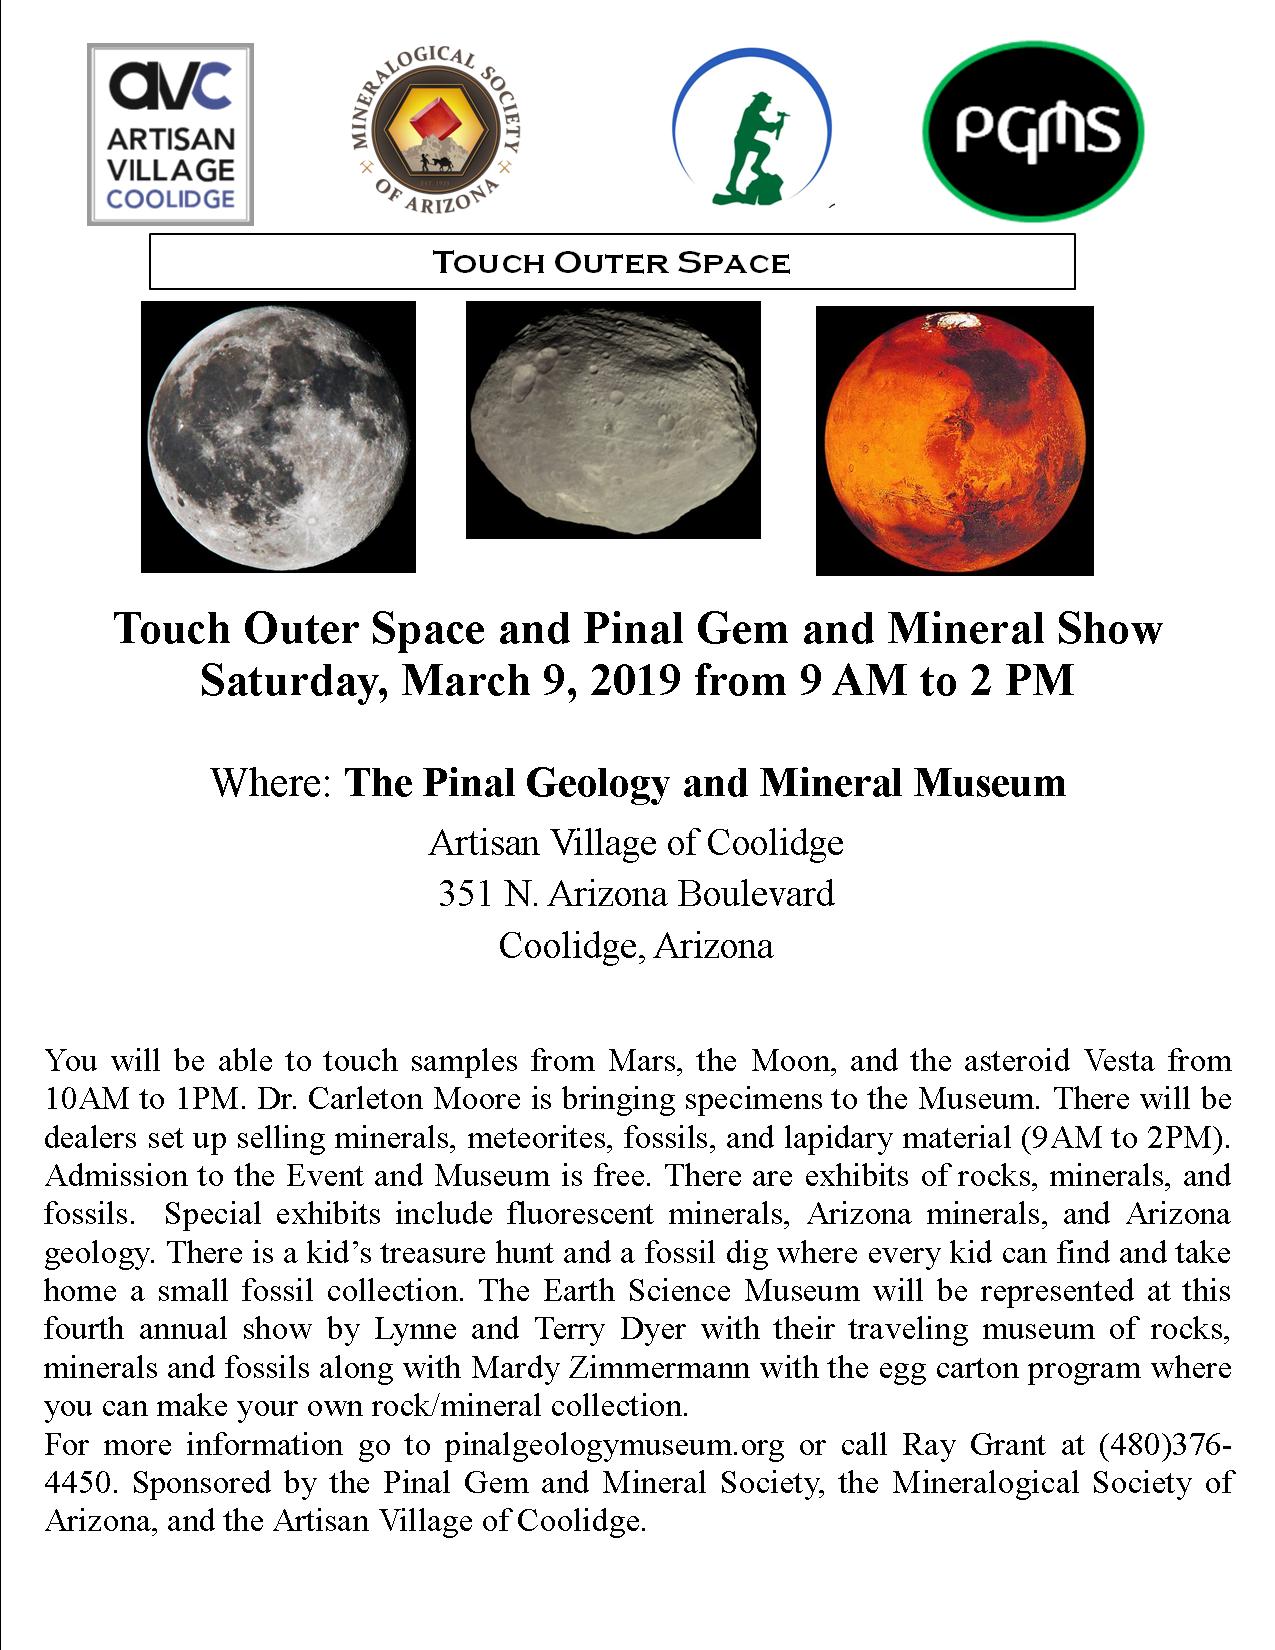 Touch Outer Space & Pinal Gem and Mineral Show @ Pinal Geology and Mineral Museum - Artisan Village